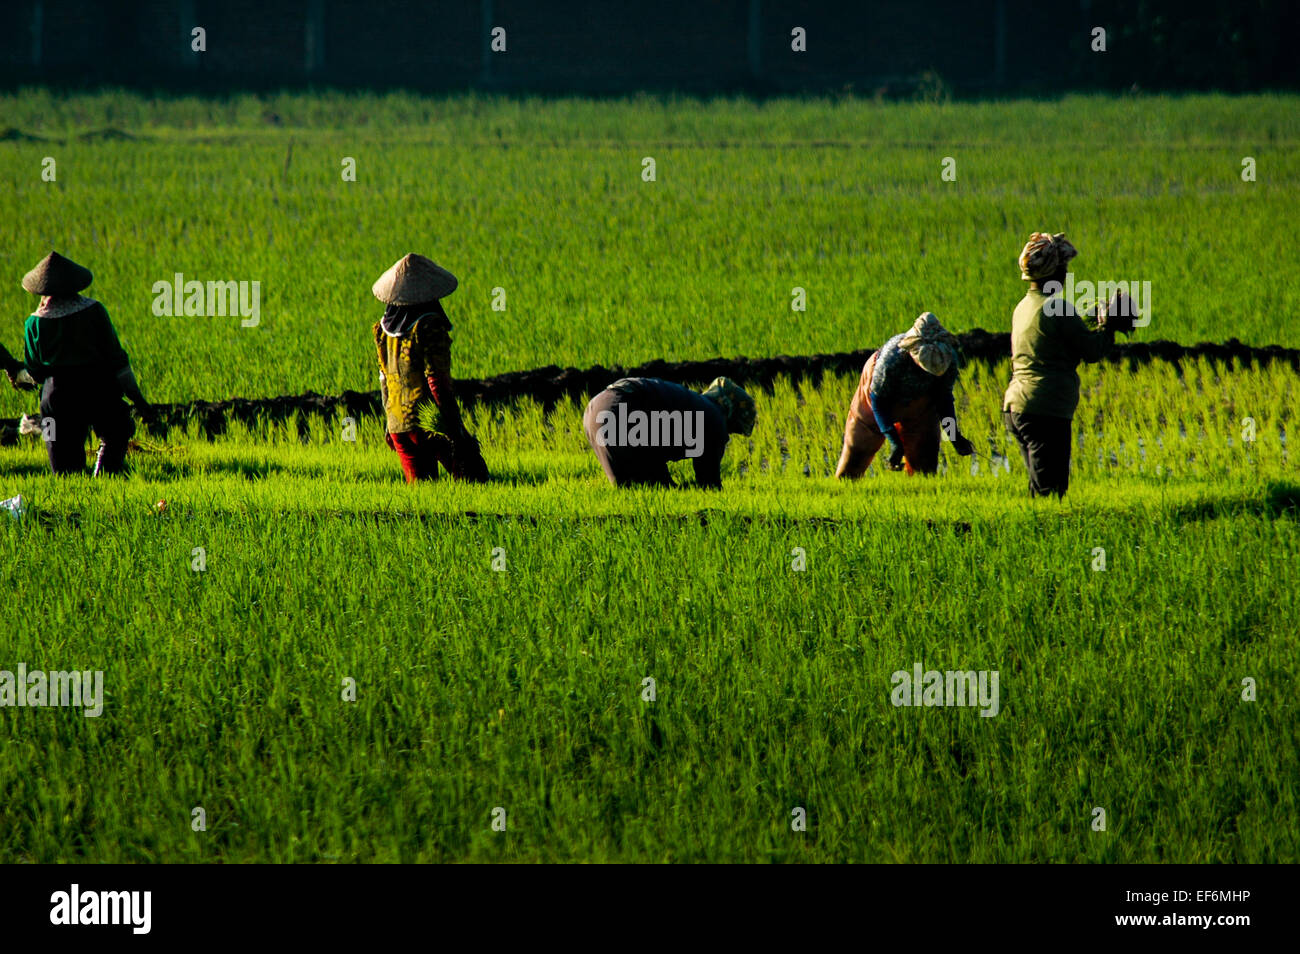 Women farmers working on a paddy field in Bandung, West Java, Indonesia. Stock Photo